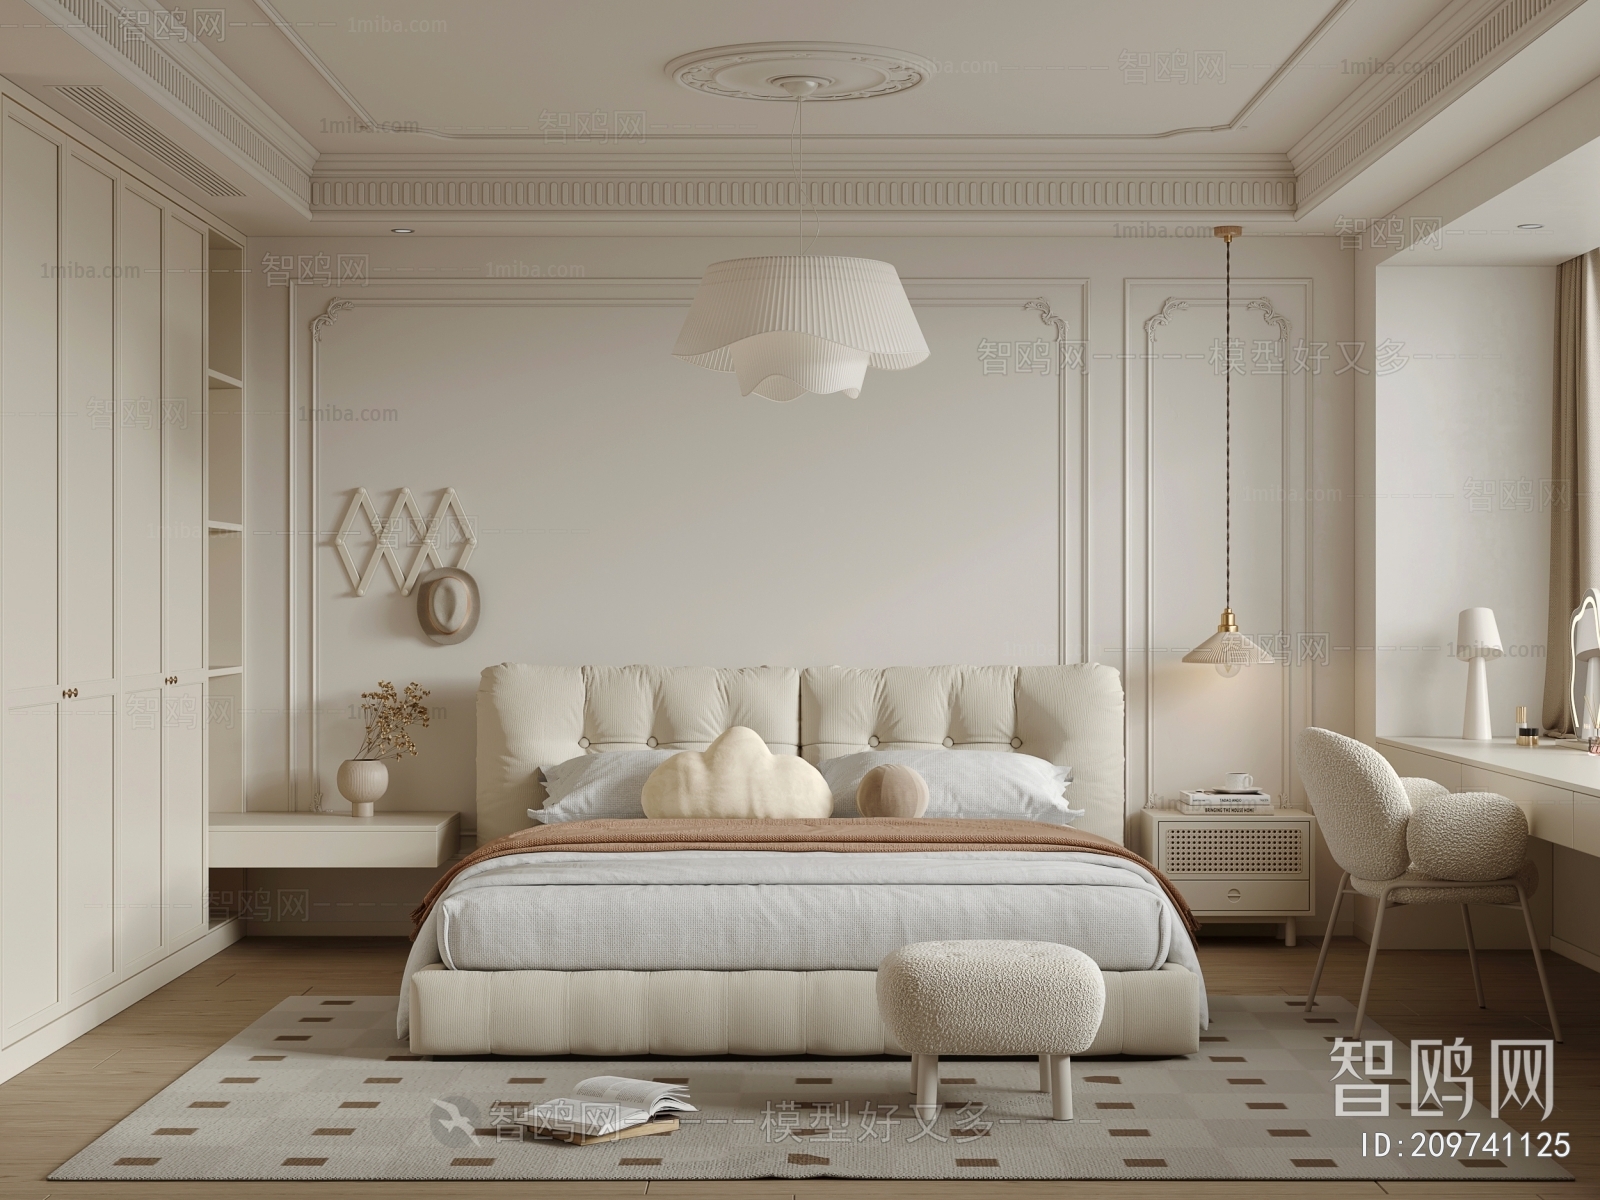 French Style Bedroom